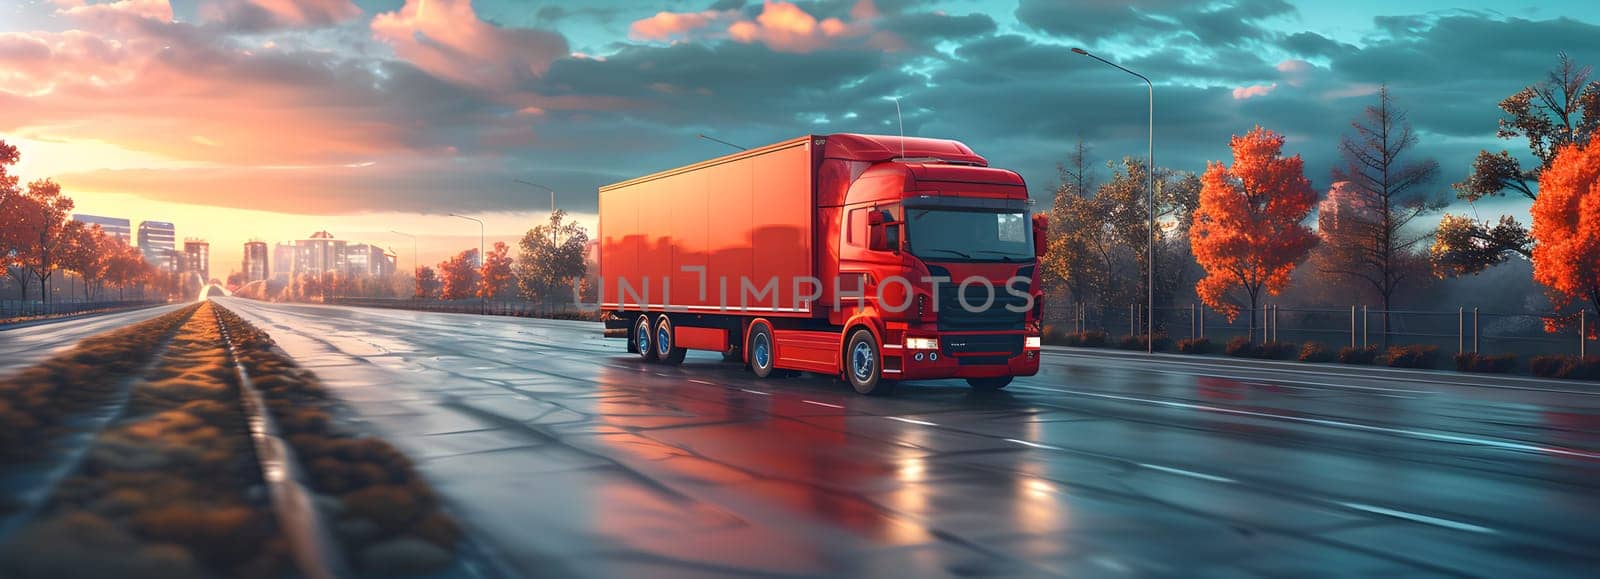 A red semi truck with automotive lighting is driving on a wet asphalt highway at sunset under cloudy skies. The trucks tires splashing water as it moves along